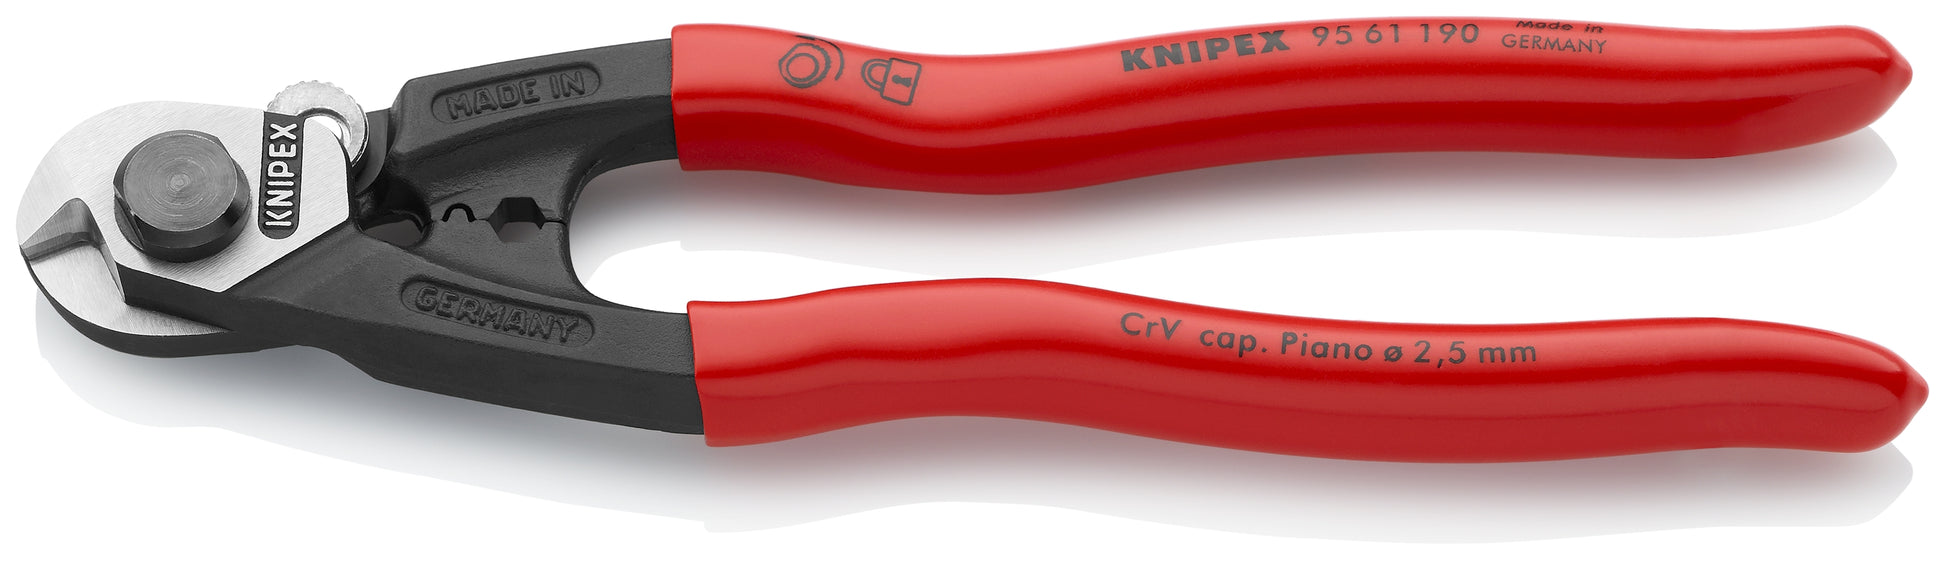 knipex wire rope cutters 7 1/2" 95 61 190